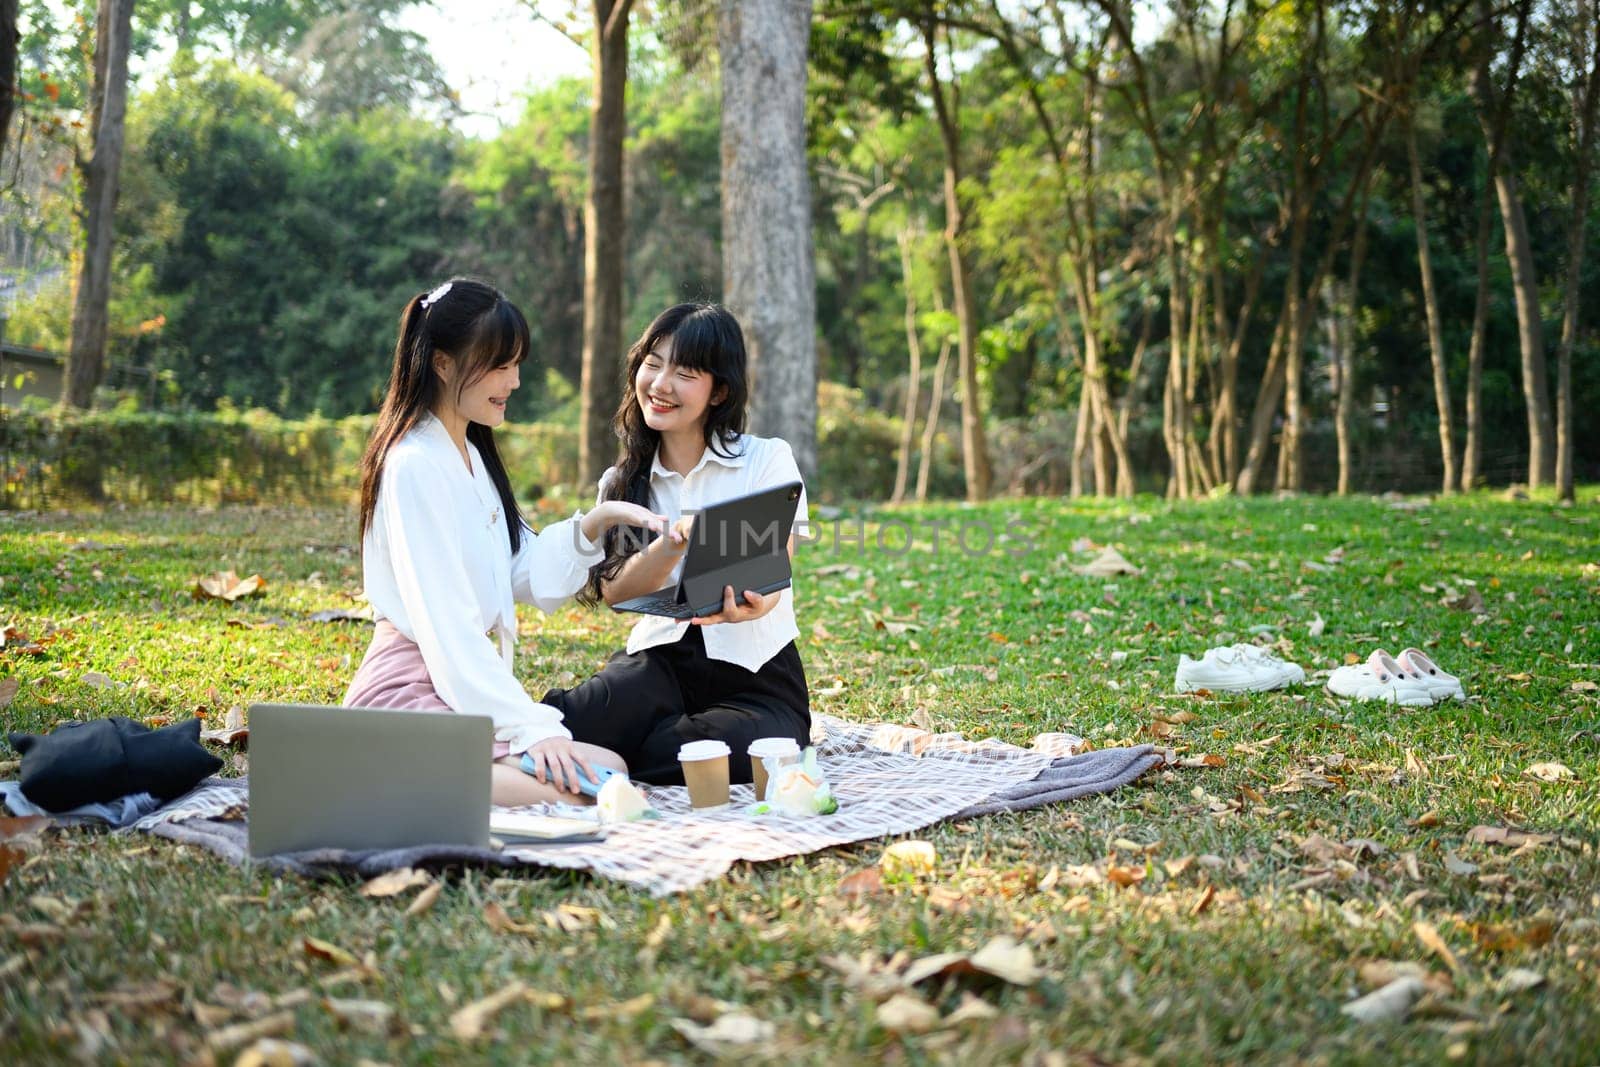 Two smiling female coworkers using digital tablet on grass in the city park.